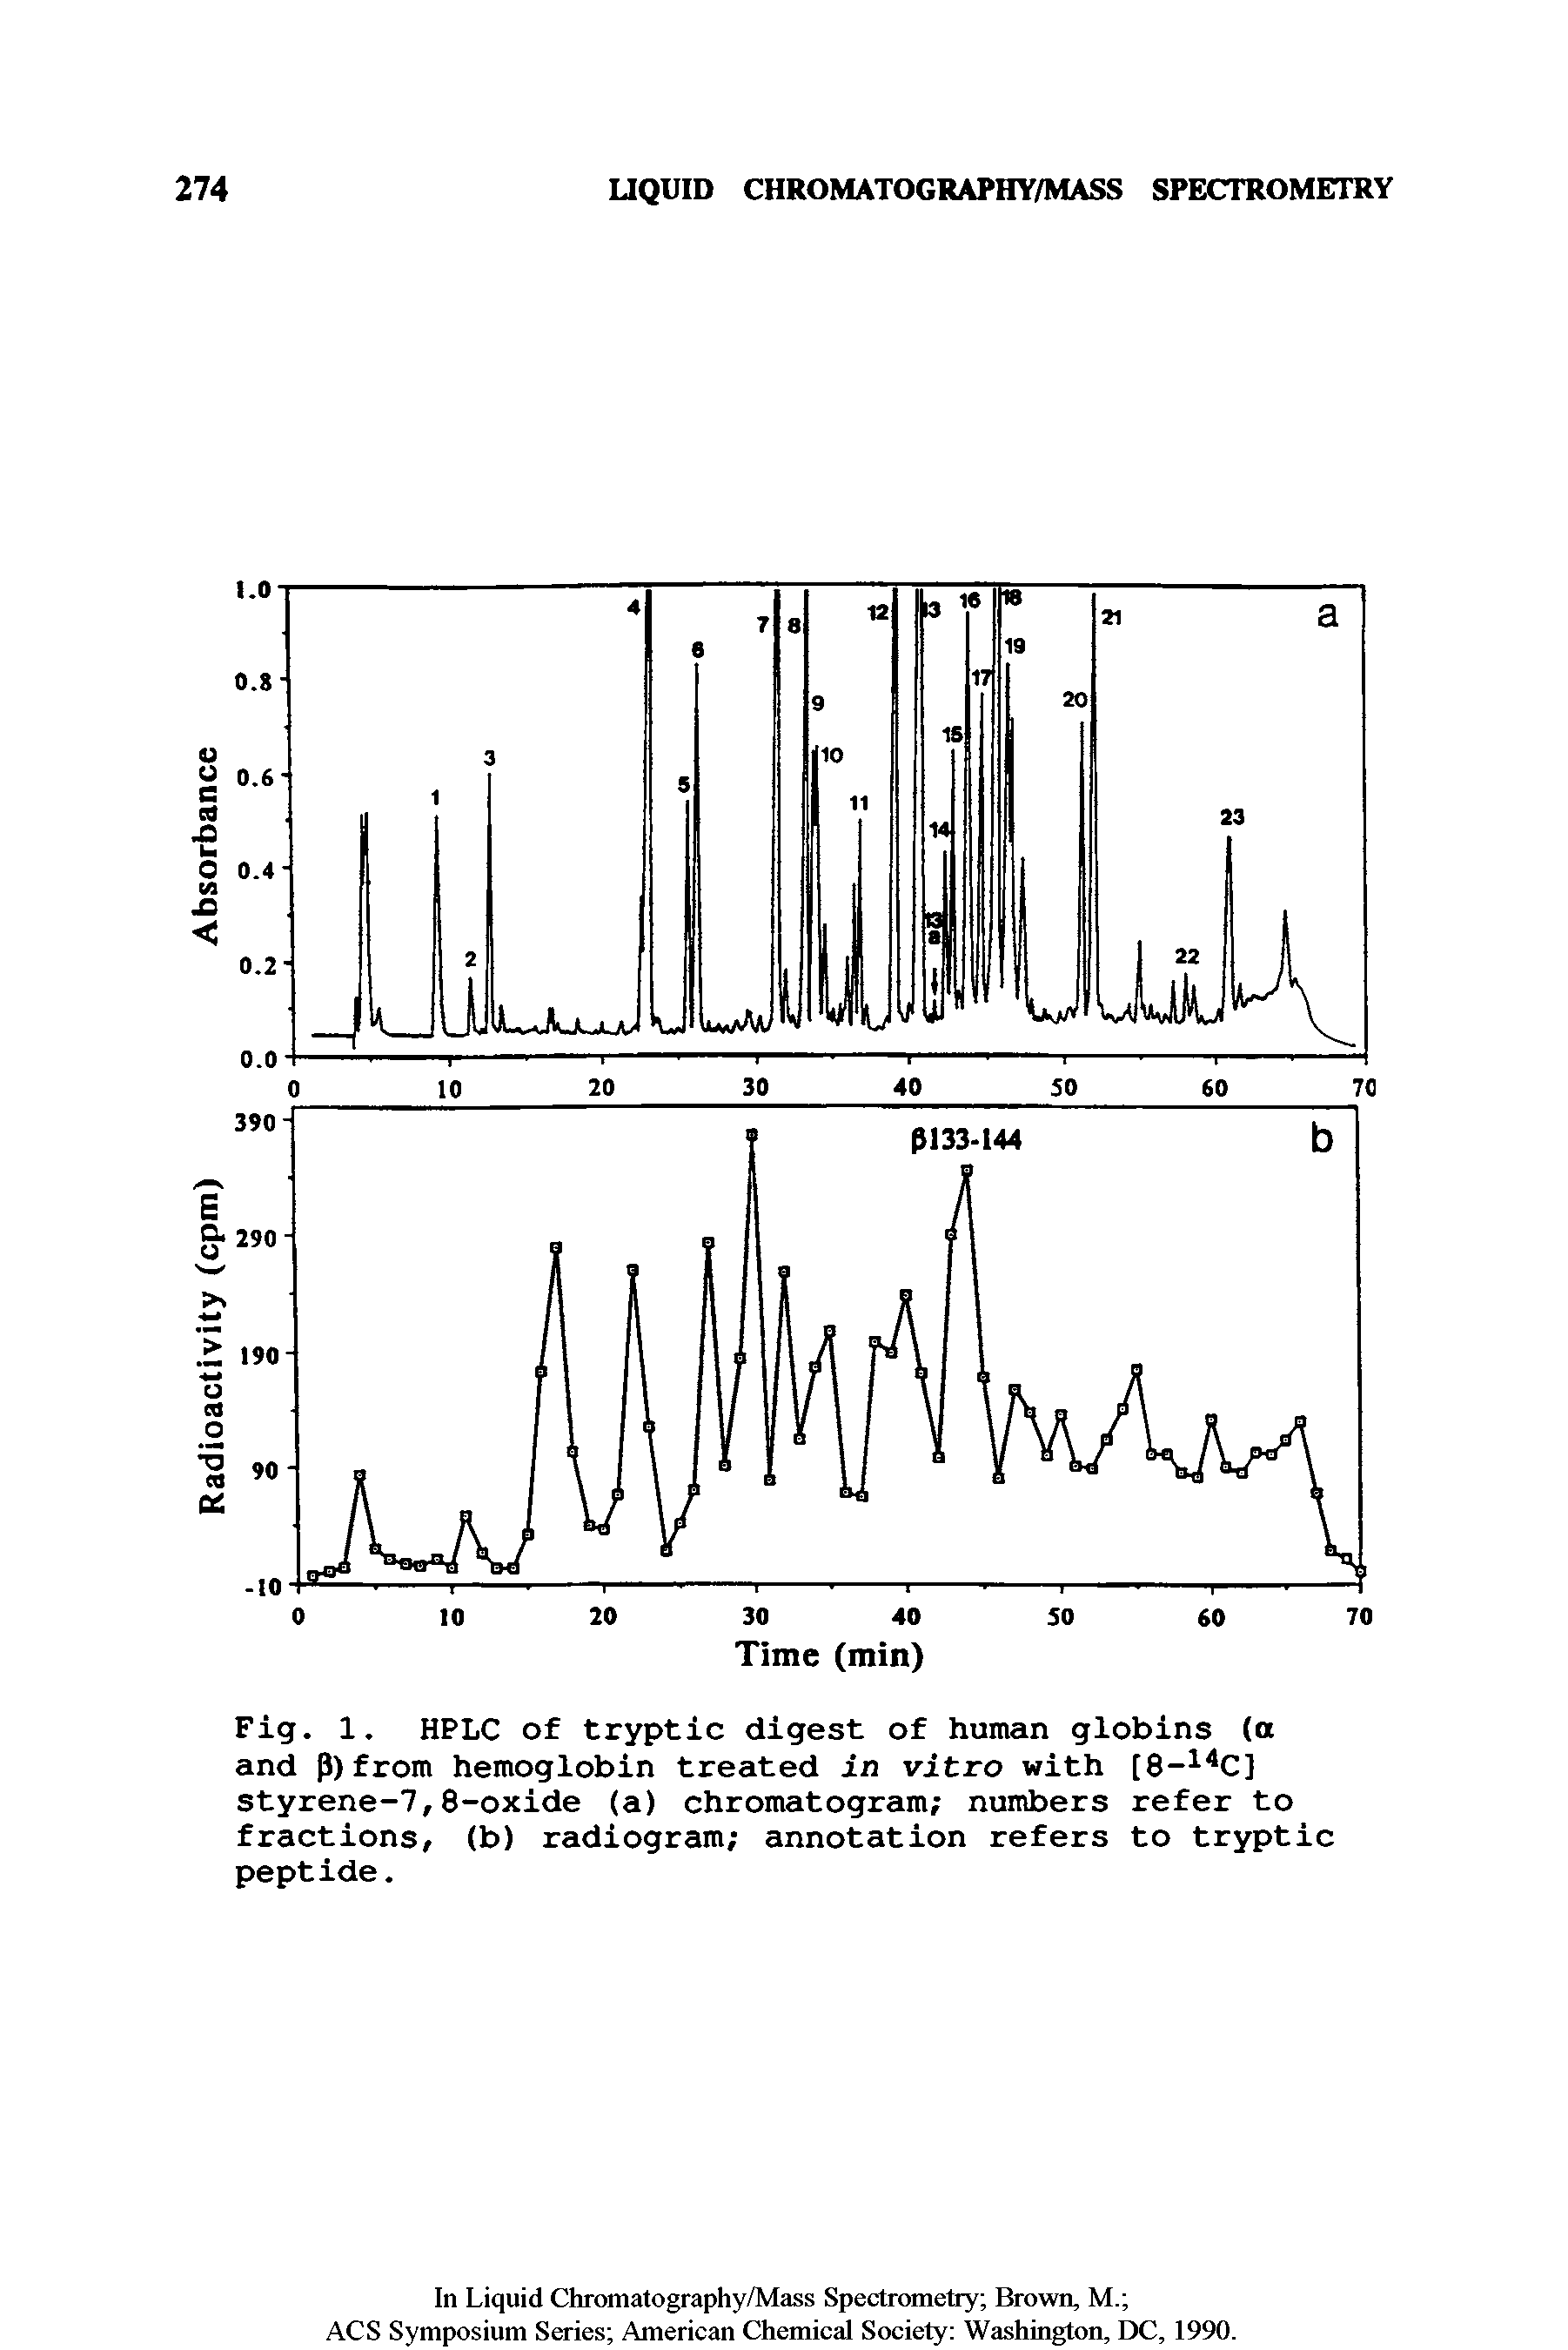 Fig. 1. HPLC of tryptic digest of human globins (a and P)from hemoglobin treated in vitro with [8-14C] styrene-7,8-oxide (a) chromatogram numbers refer to fractions, (b) radiogram annotation refers to tryptic peptide.